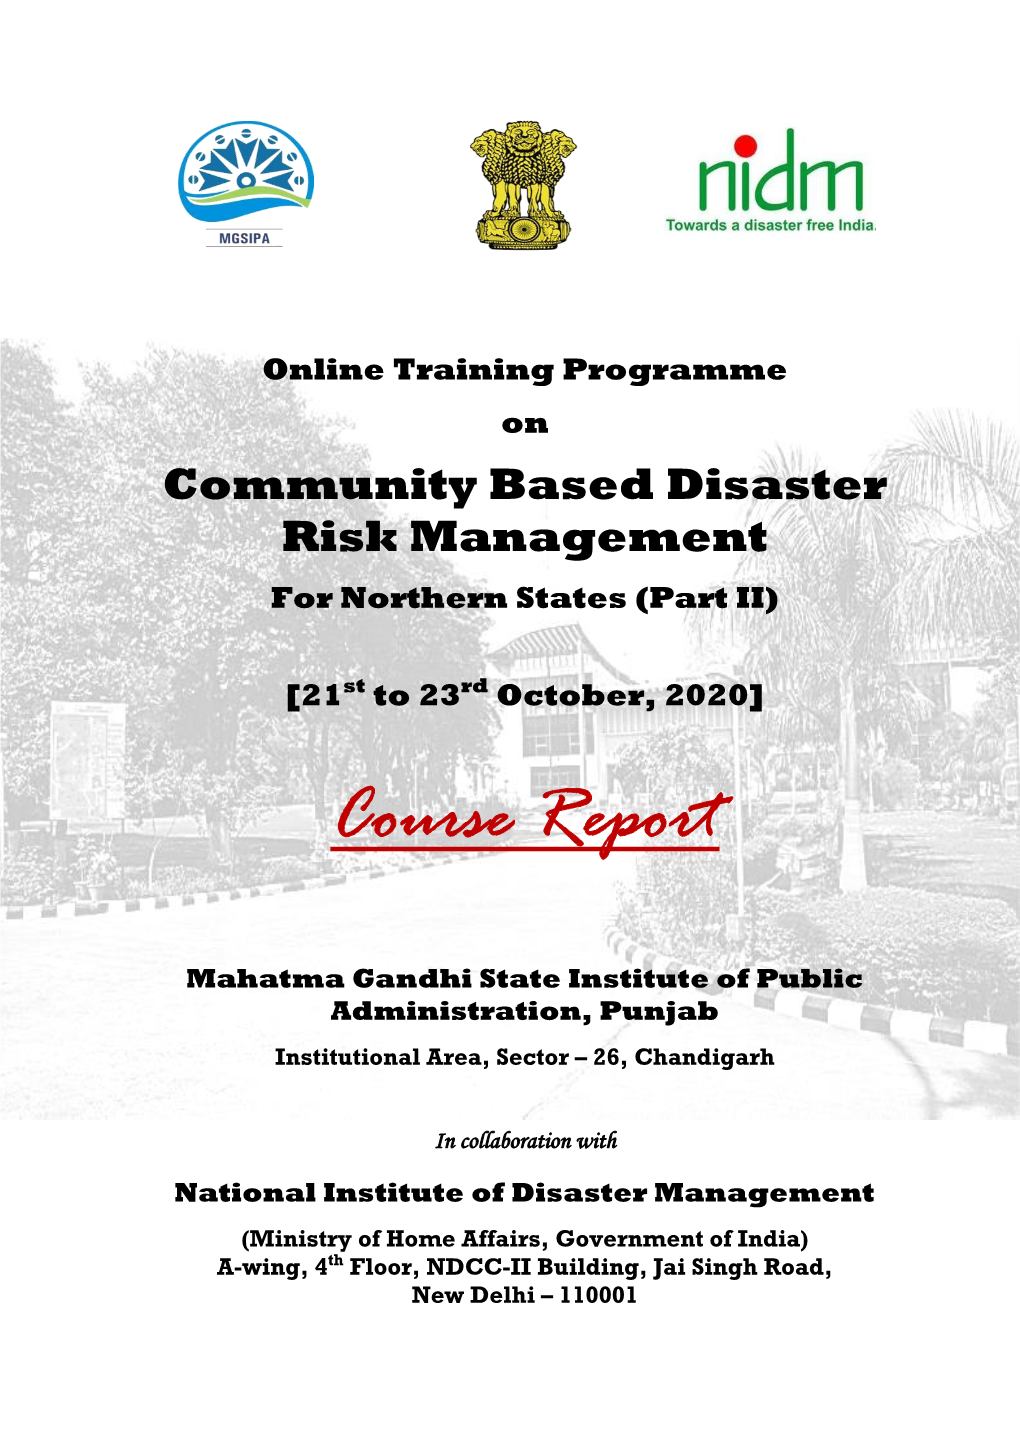 Community Based Disaster Risk Management for Northern States (Part II)